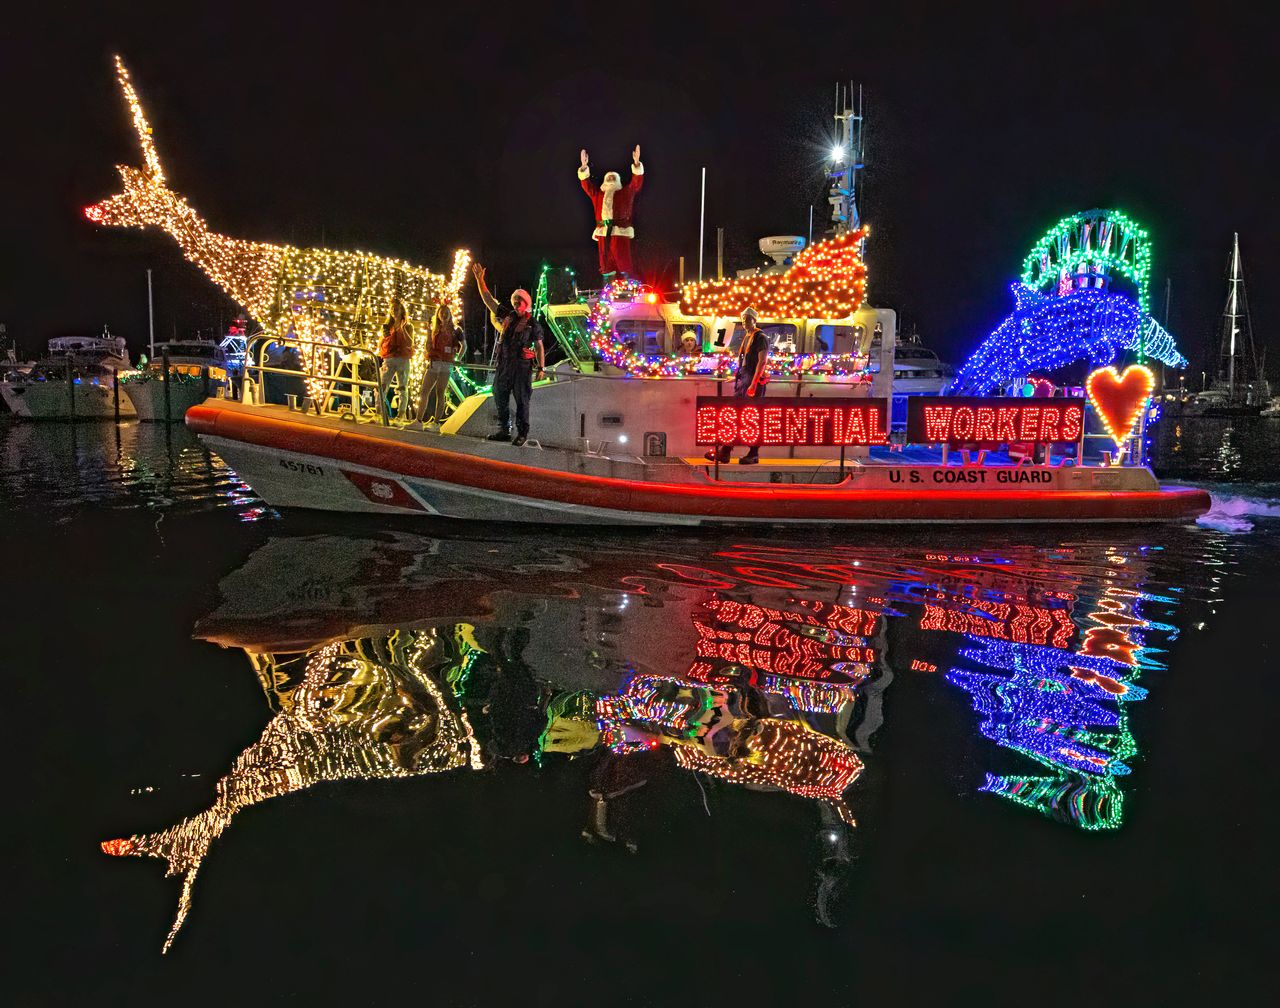 Festively lighted craft of all kinds cruise past Key West Historic Seaport and harbor areas during the annual Schooner Wharf Bar Lighted Boat Parade. Photo: Carol Tedesco